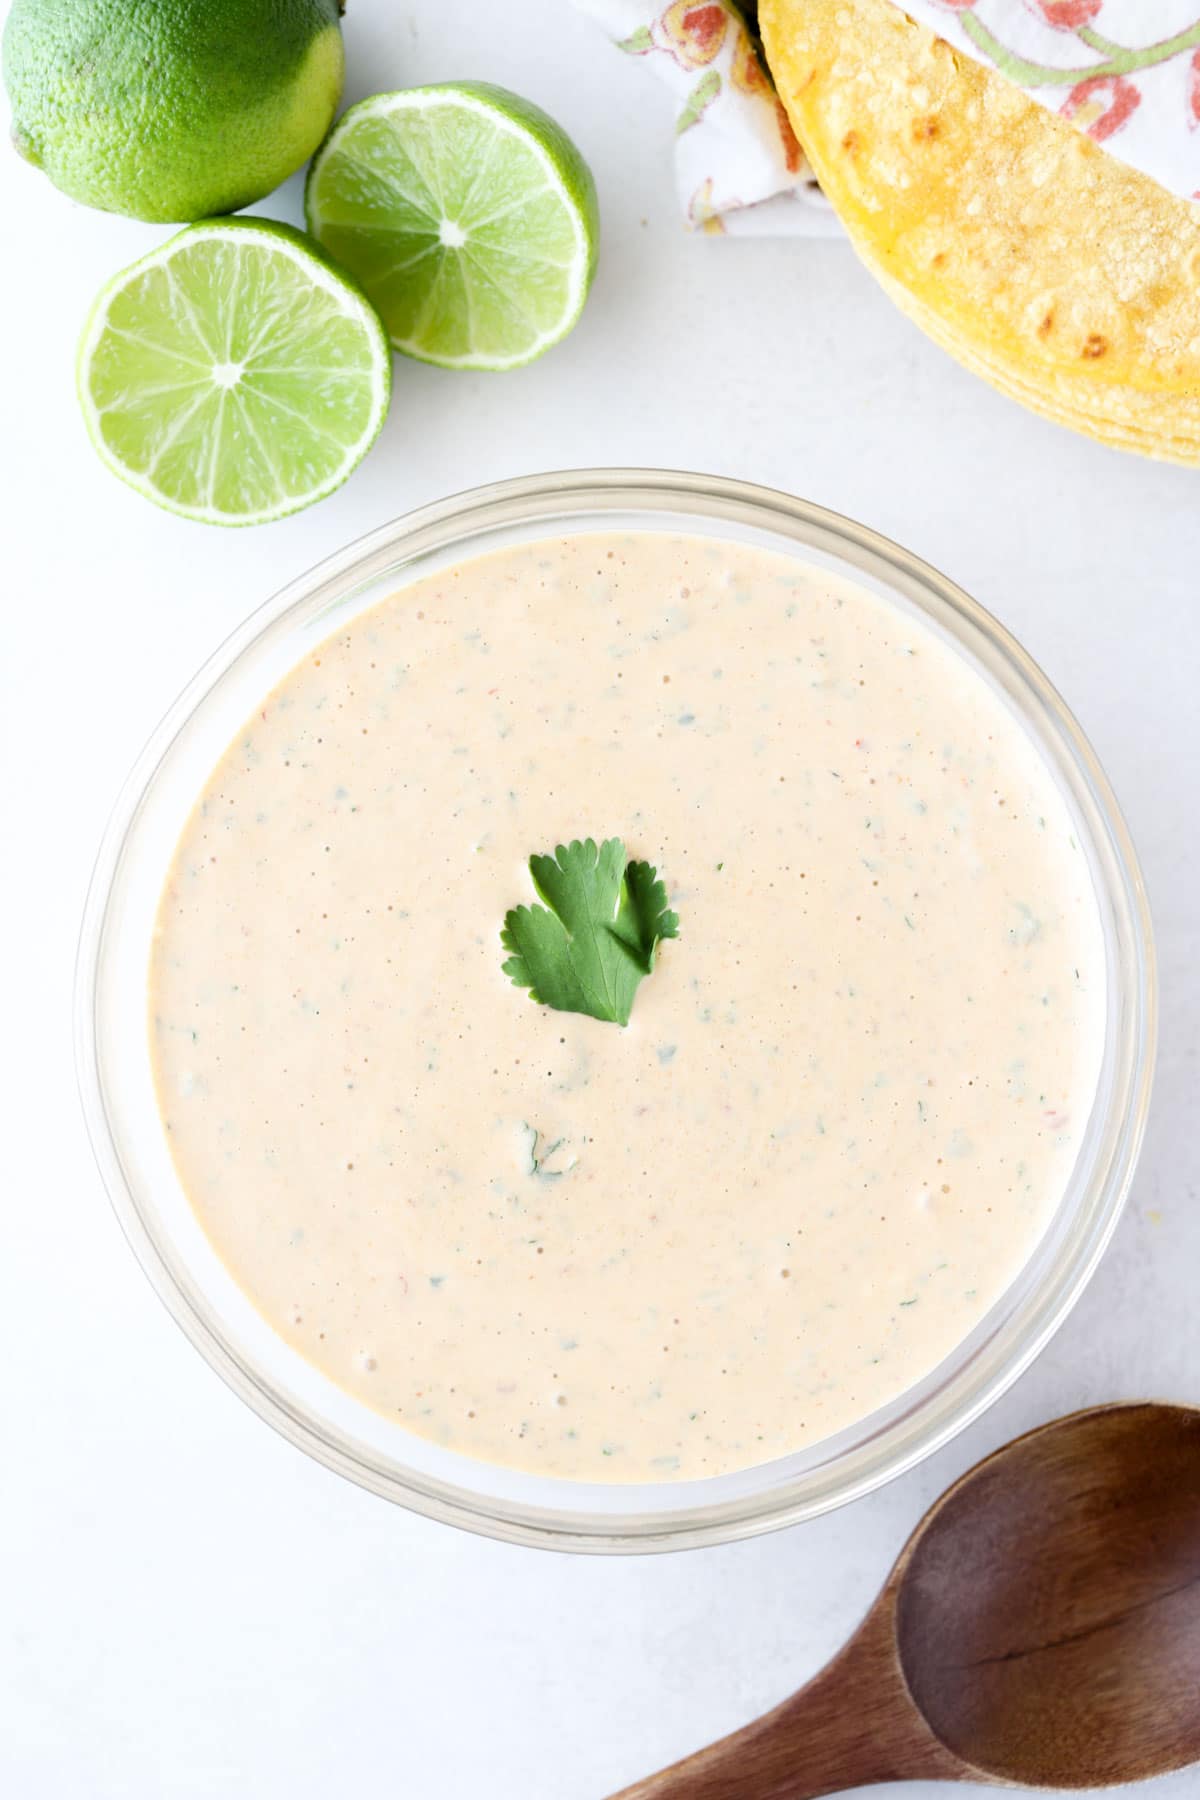 chipotle sauce for fish tacos